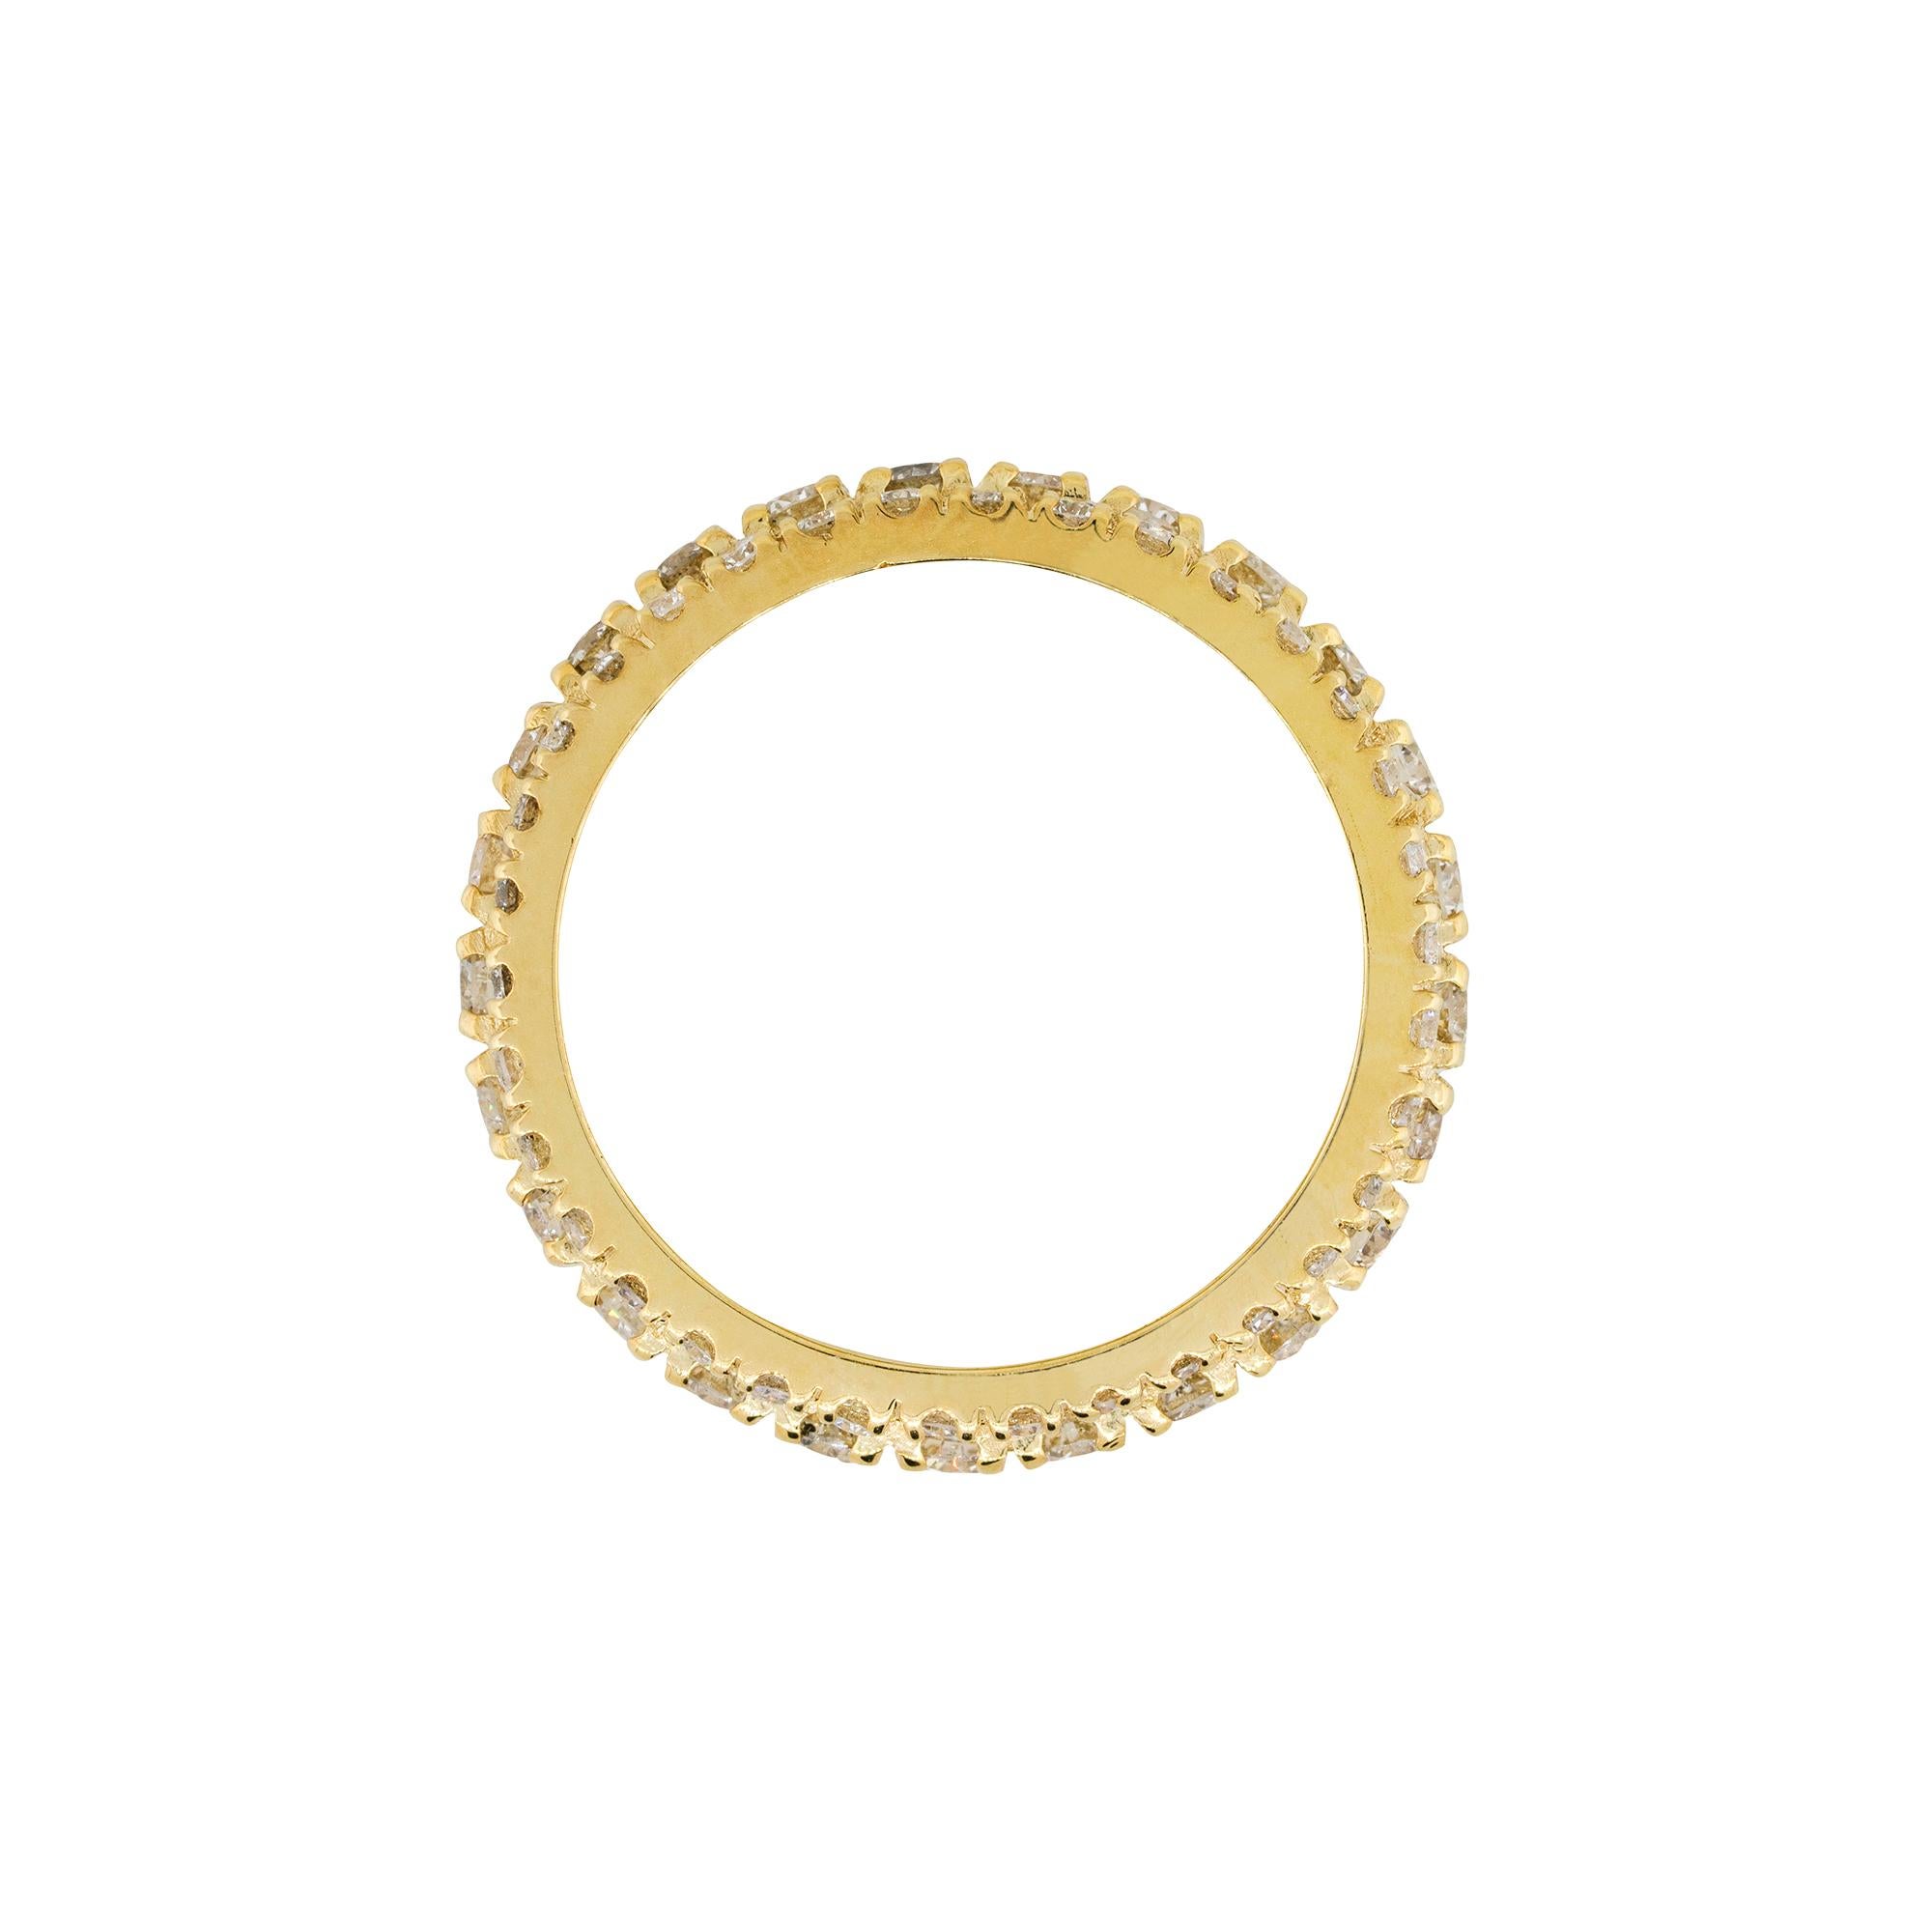 Material: 14k Yellow Gold
Diamond Details: Approximately 3.85ctw of Round Brilliant Diamonds. Diamonds are G/H in color and VS in clarity
Ring Size: 10
Ring Measurements: 1″x 0.25″
Total Weight: 10.8g (7dwt)
Additional Details: This item comes with